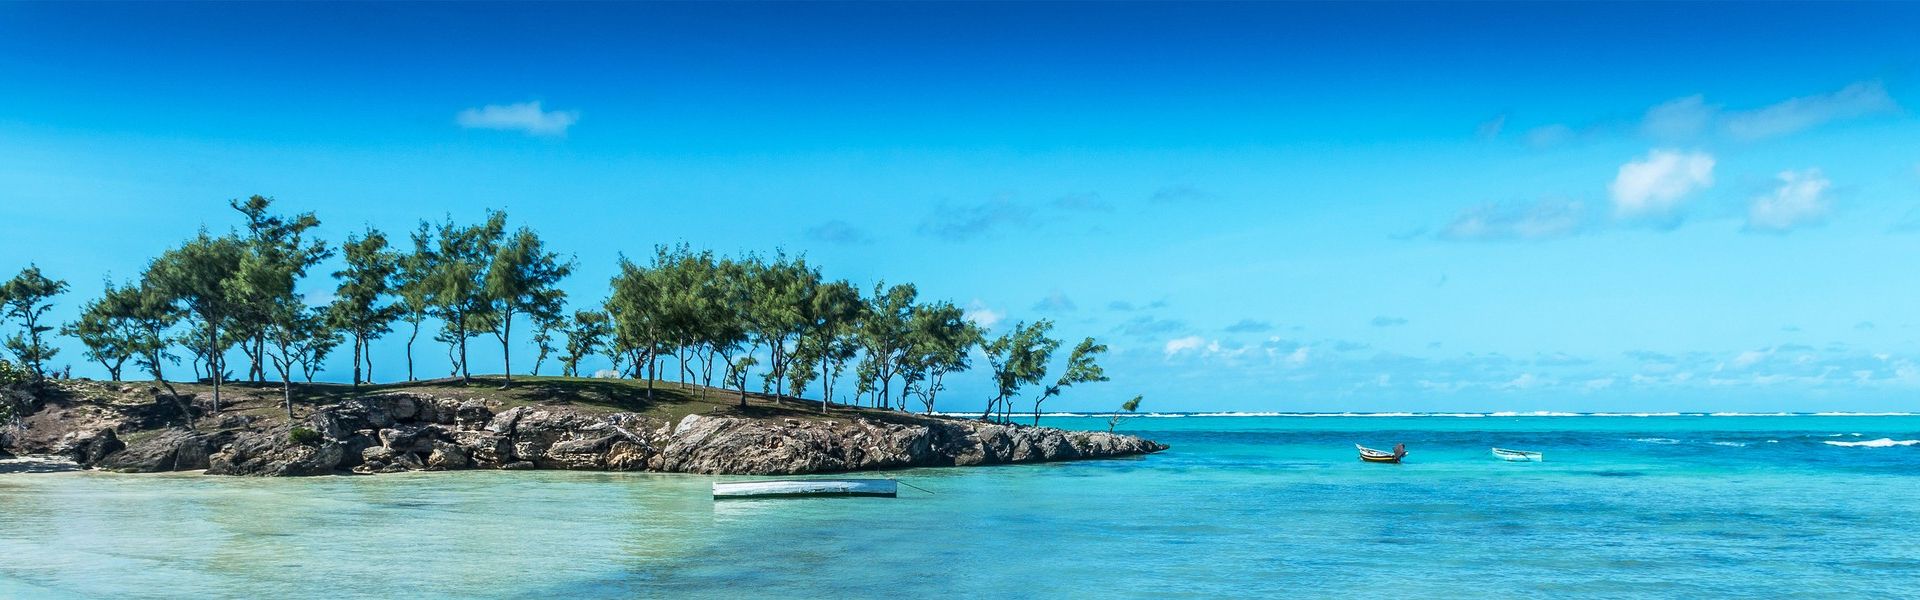 Rodrigues Island is known as the little sister of Mauritius. It is a real gem in the Indian Ocean. It is very peaceful and typical just like its inhabitants. It is also known as the 